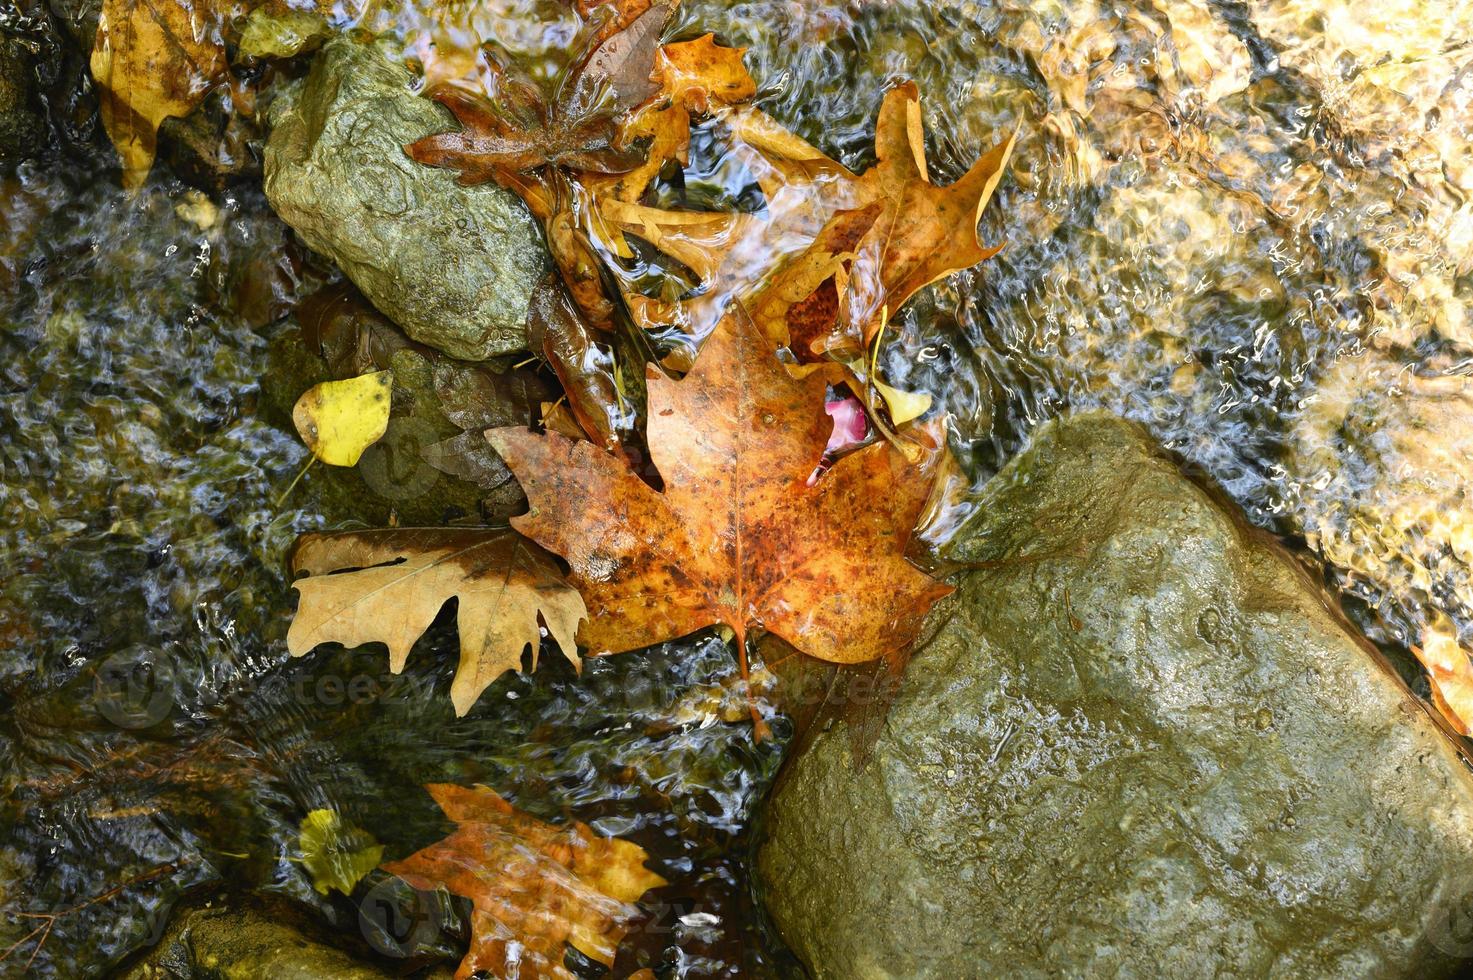 Pile of wet fallen autumn maple leaves in the water and rocks photo